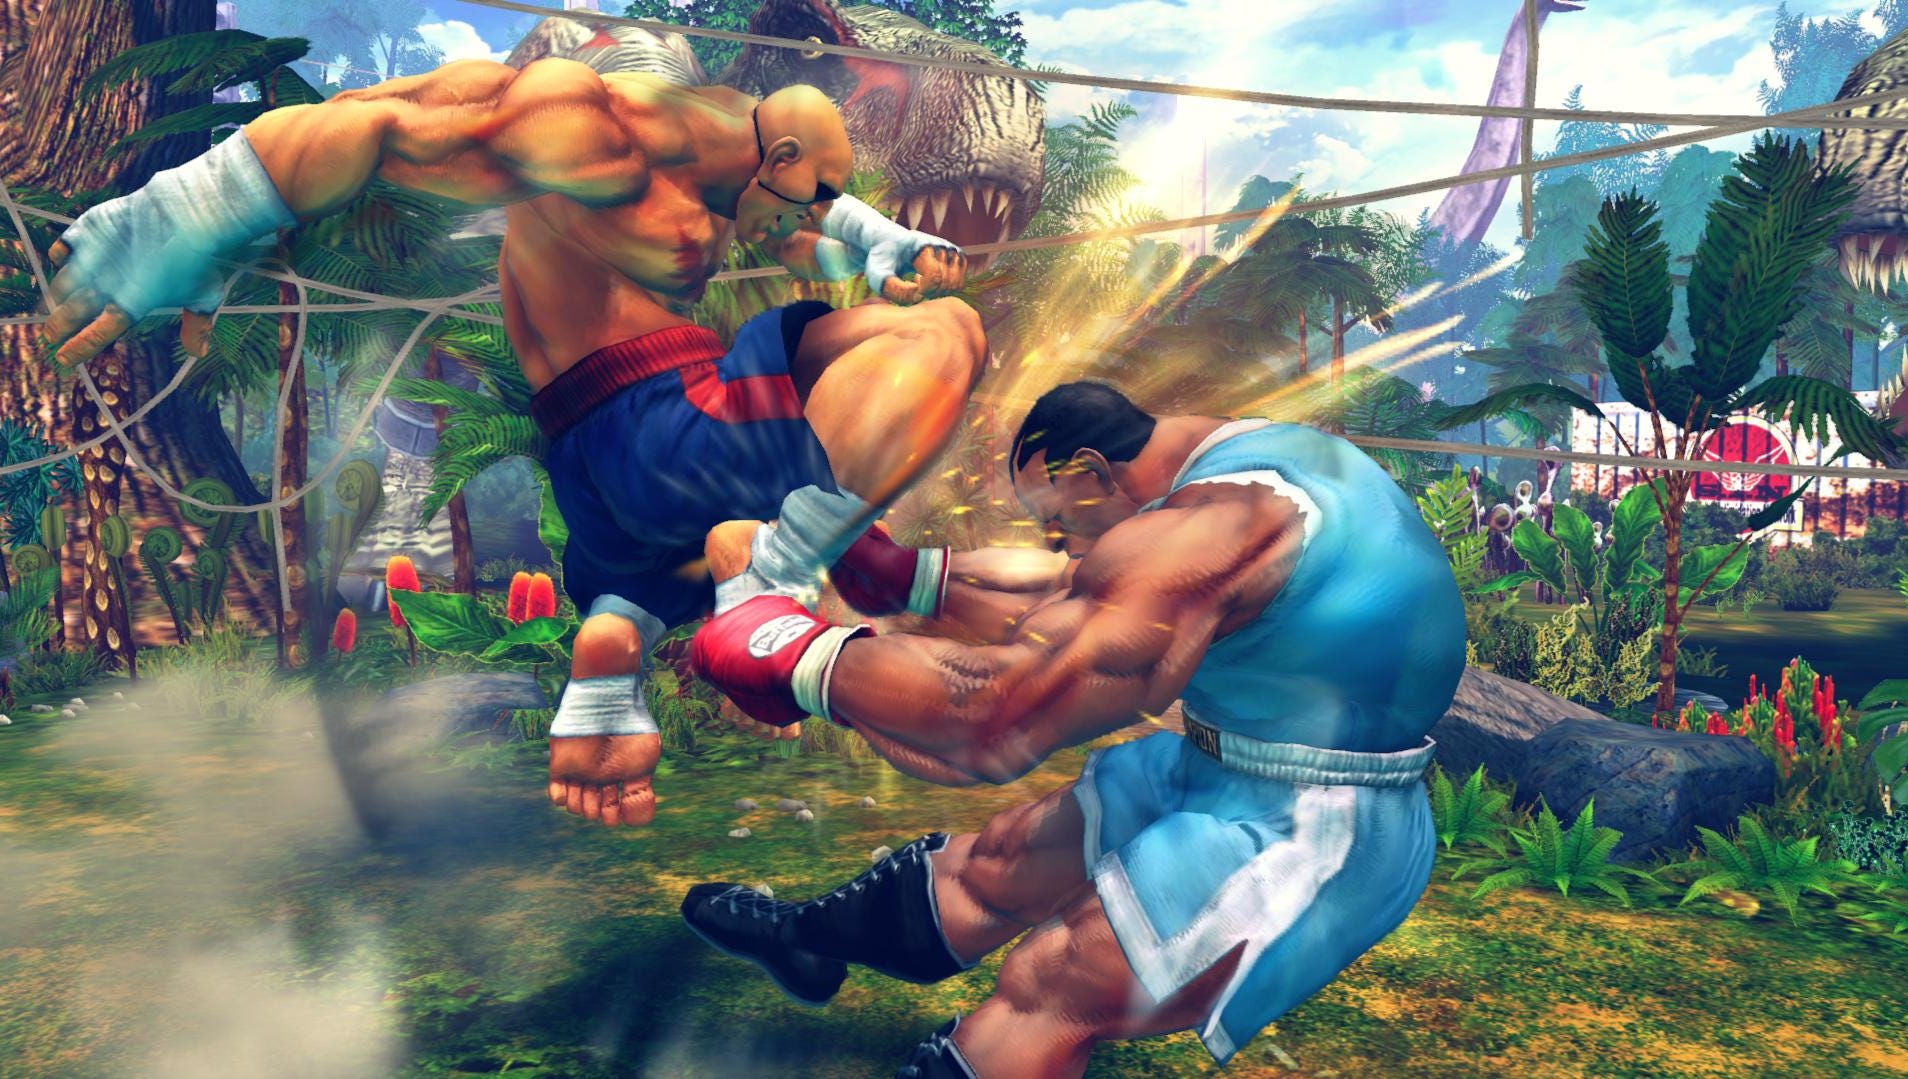 little fighter 4 turbo download